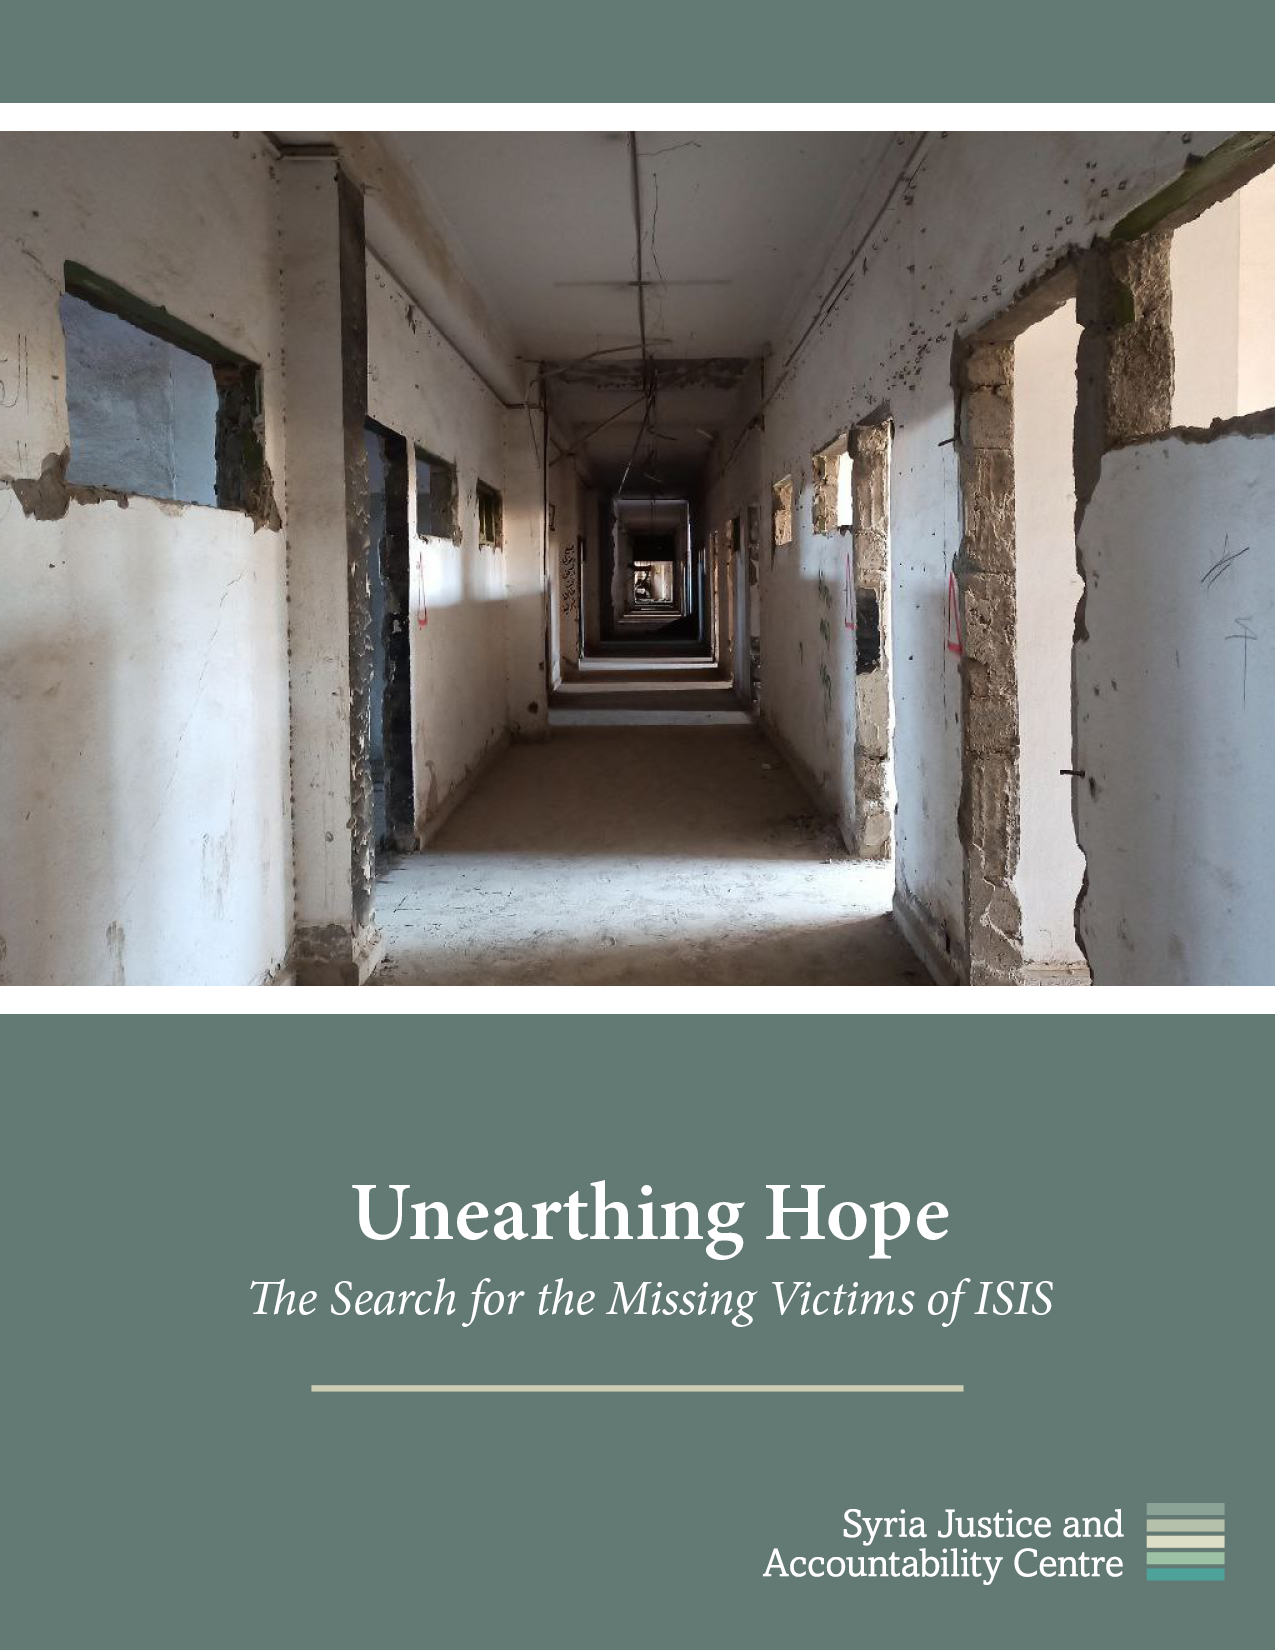 Unearthing Hope: The Search for the Missing Victims of ISIS